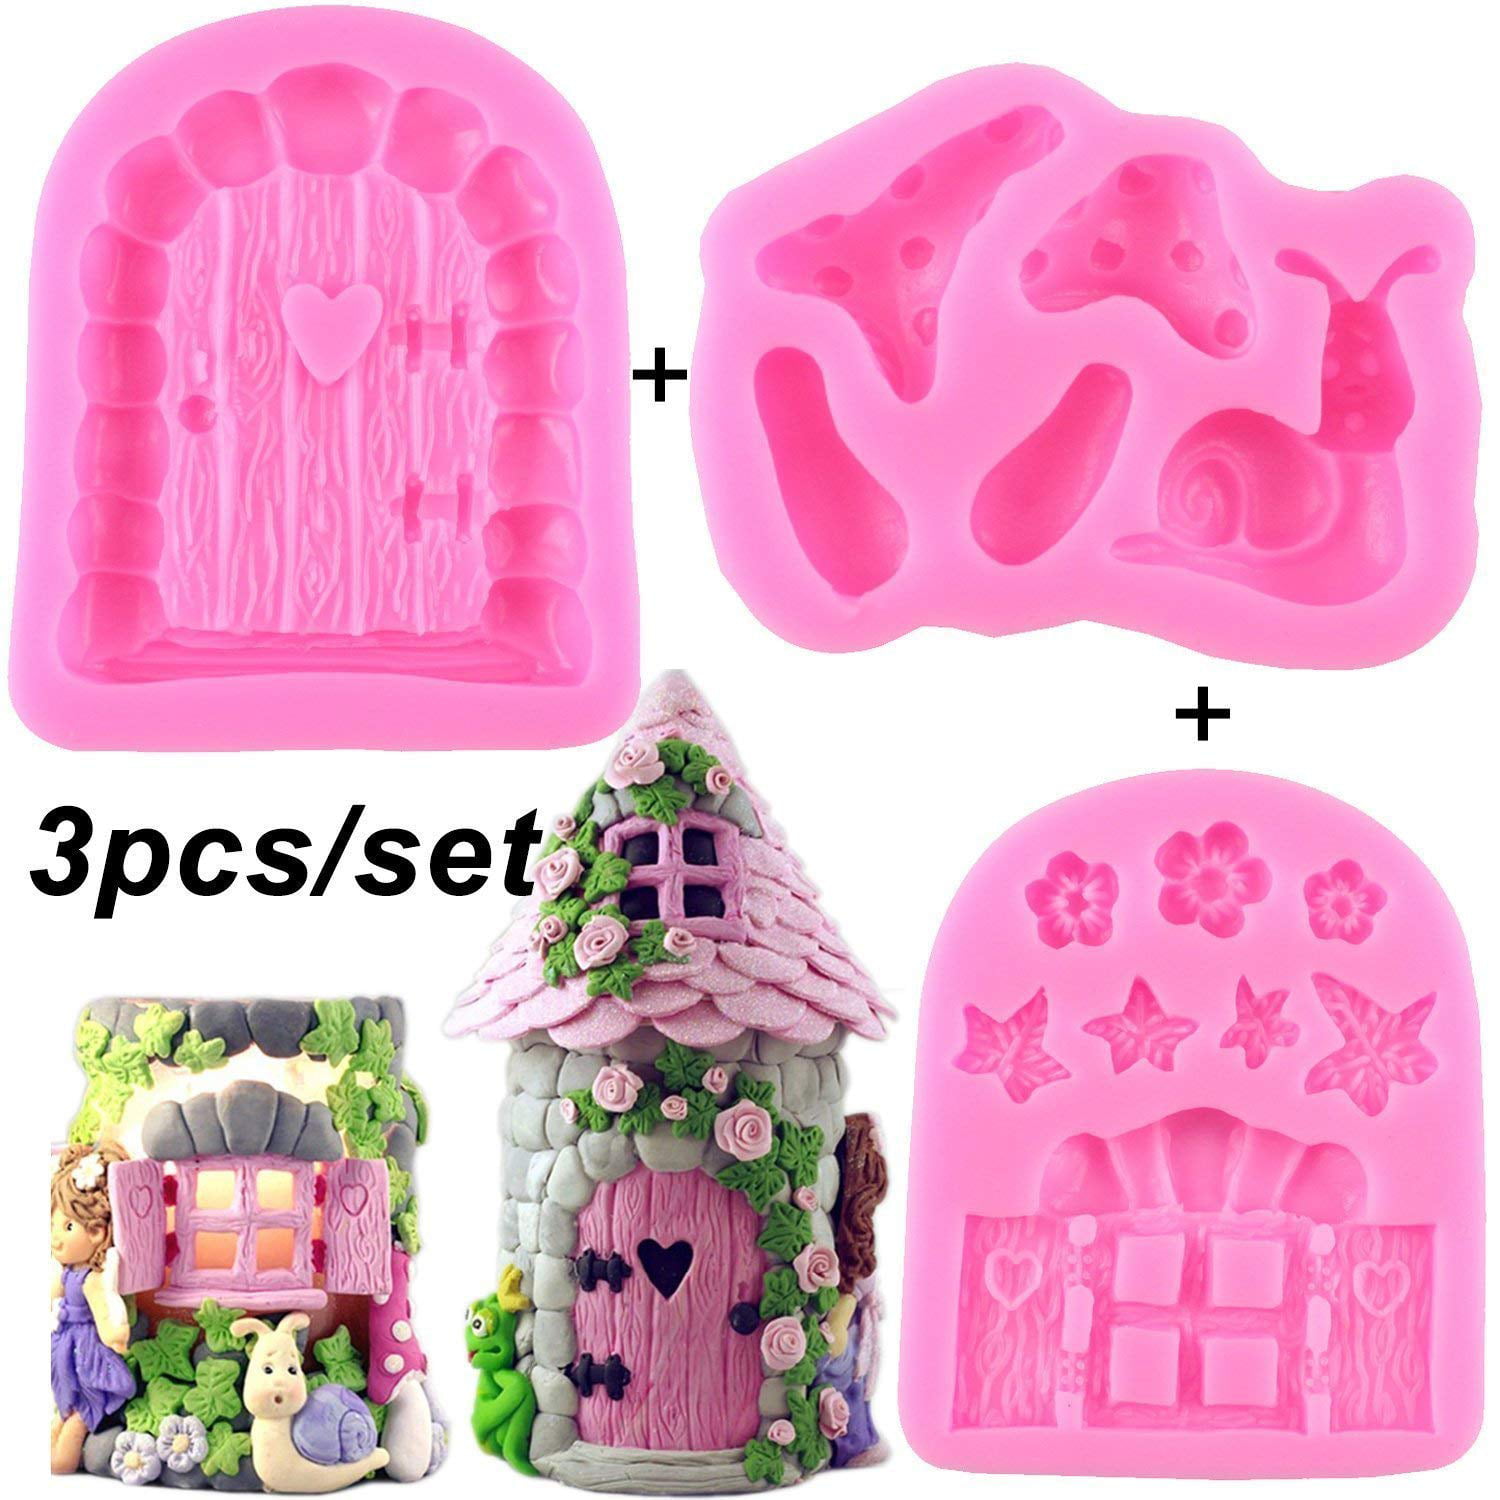 Gnome mold House Cartoon Door fondant mold Fairy wizard Silicone Cupcake Baking Molds forest party Fondant molds wood door window Cake Decorating Tools Gumpaste mushroom Chocolate Candy Clay Mould 